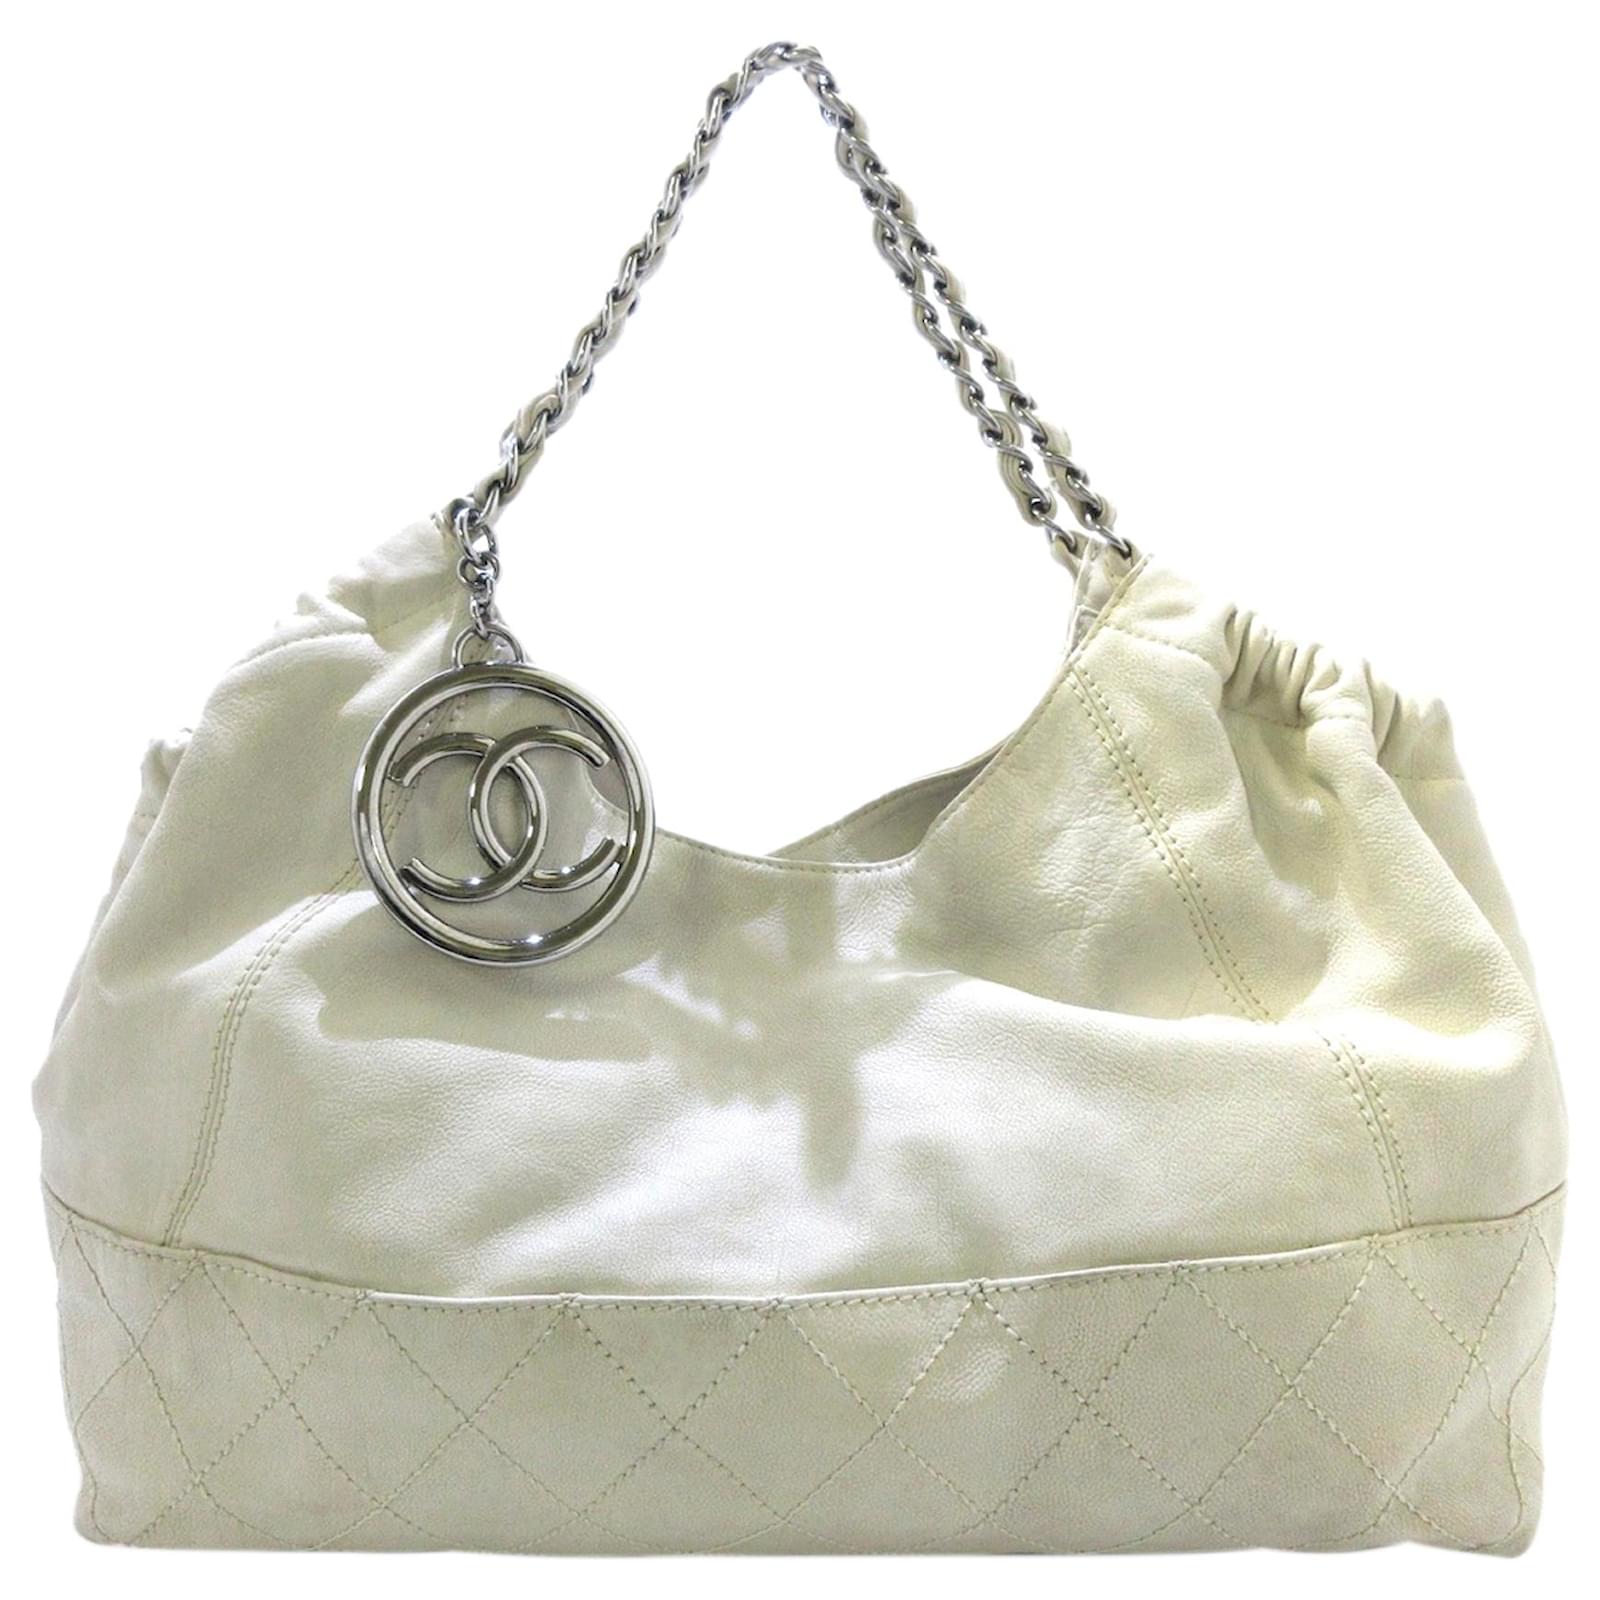 Authentic Chanel White Calfskin Leather Coco Cabas Shoulder Tote Bag